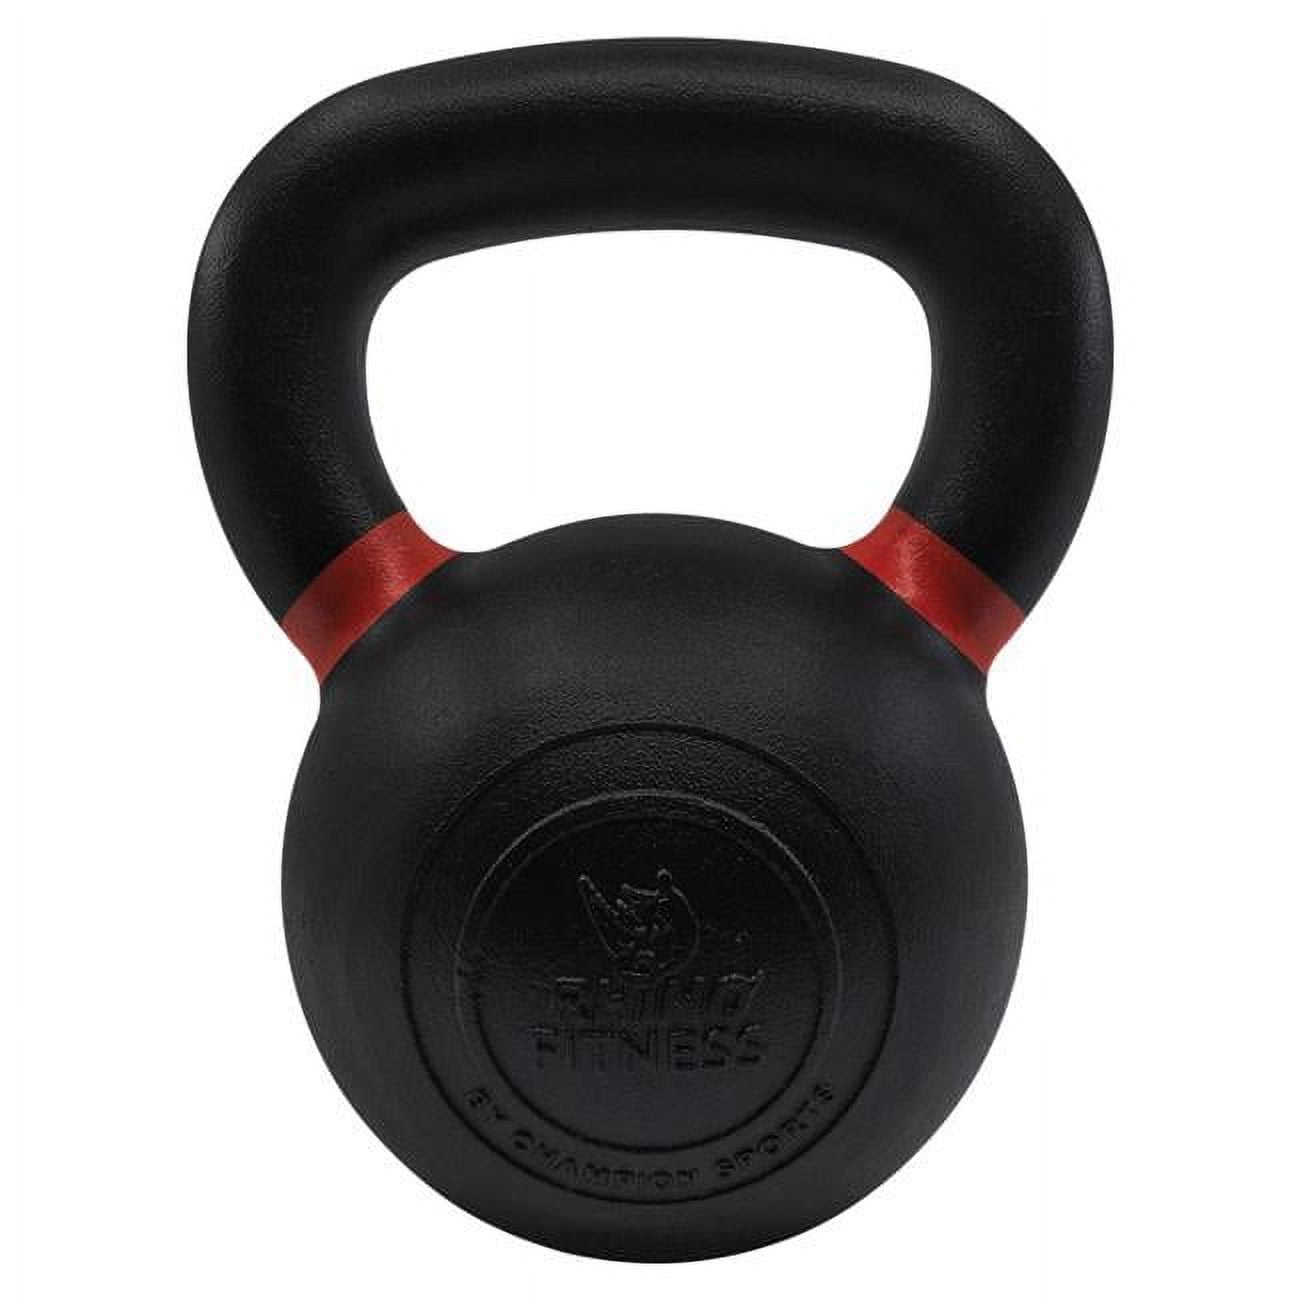 Picture of Champion Sports PCK40 7 x 6 x 10 in. 40 lbs Iron Kettlebell with Red Handles